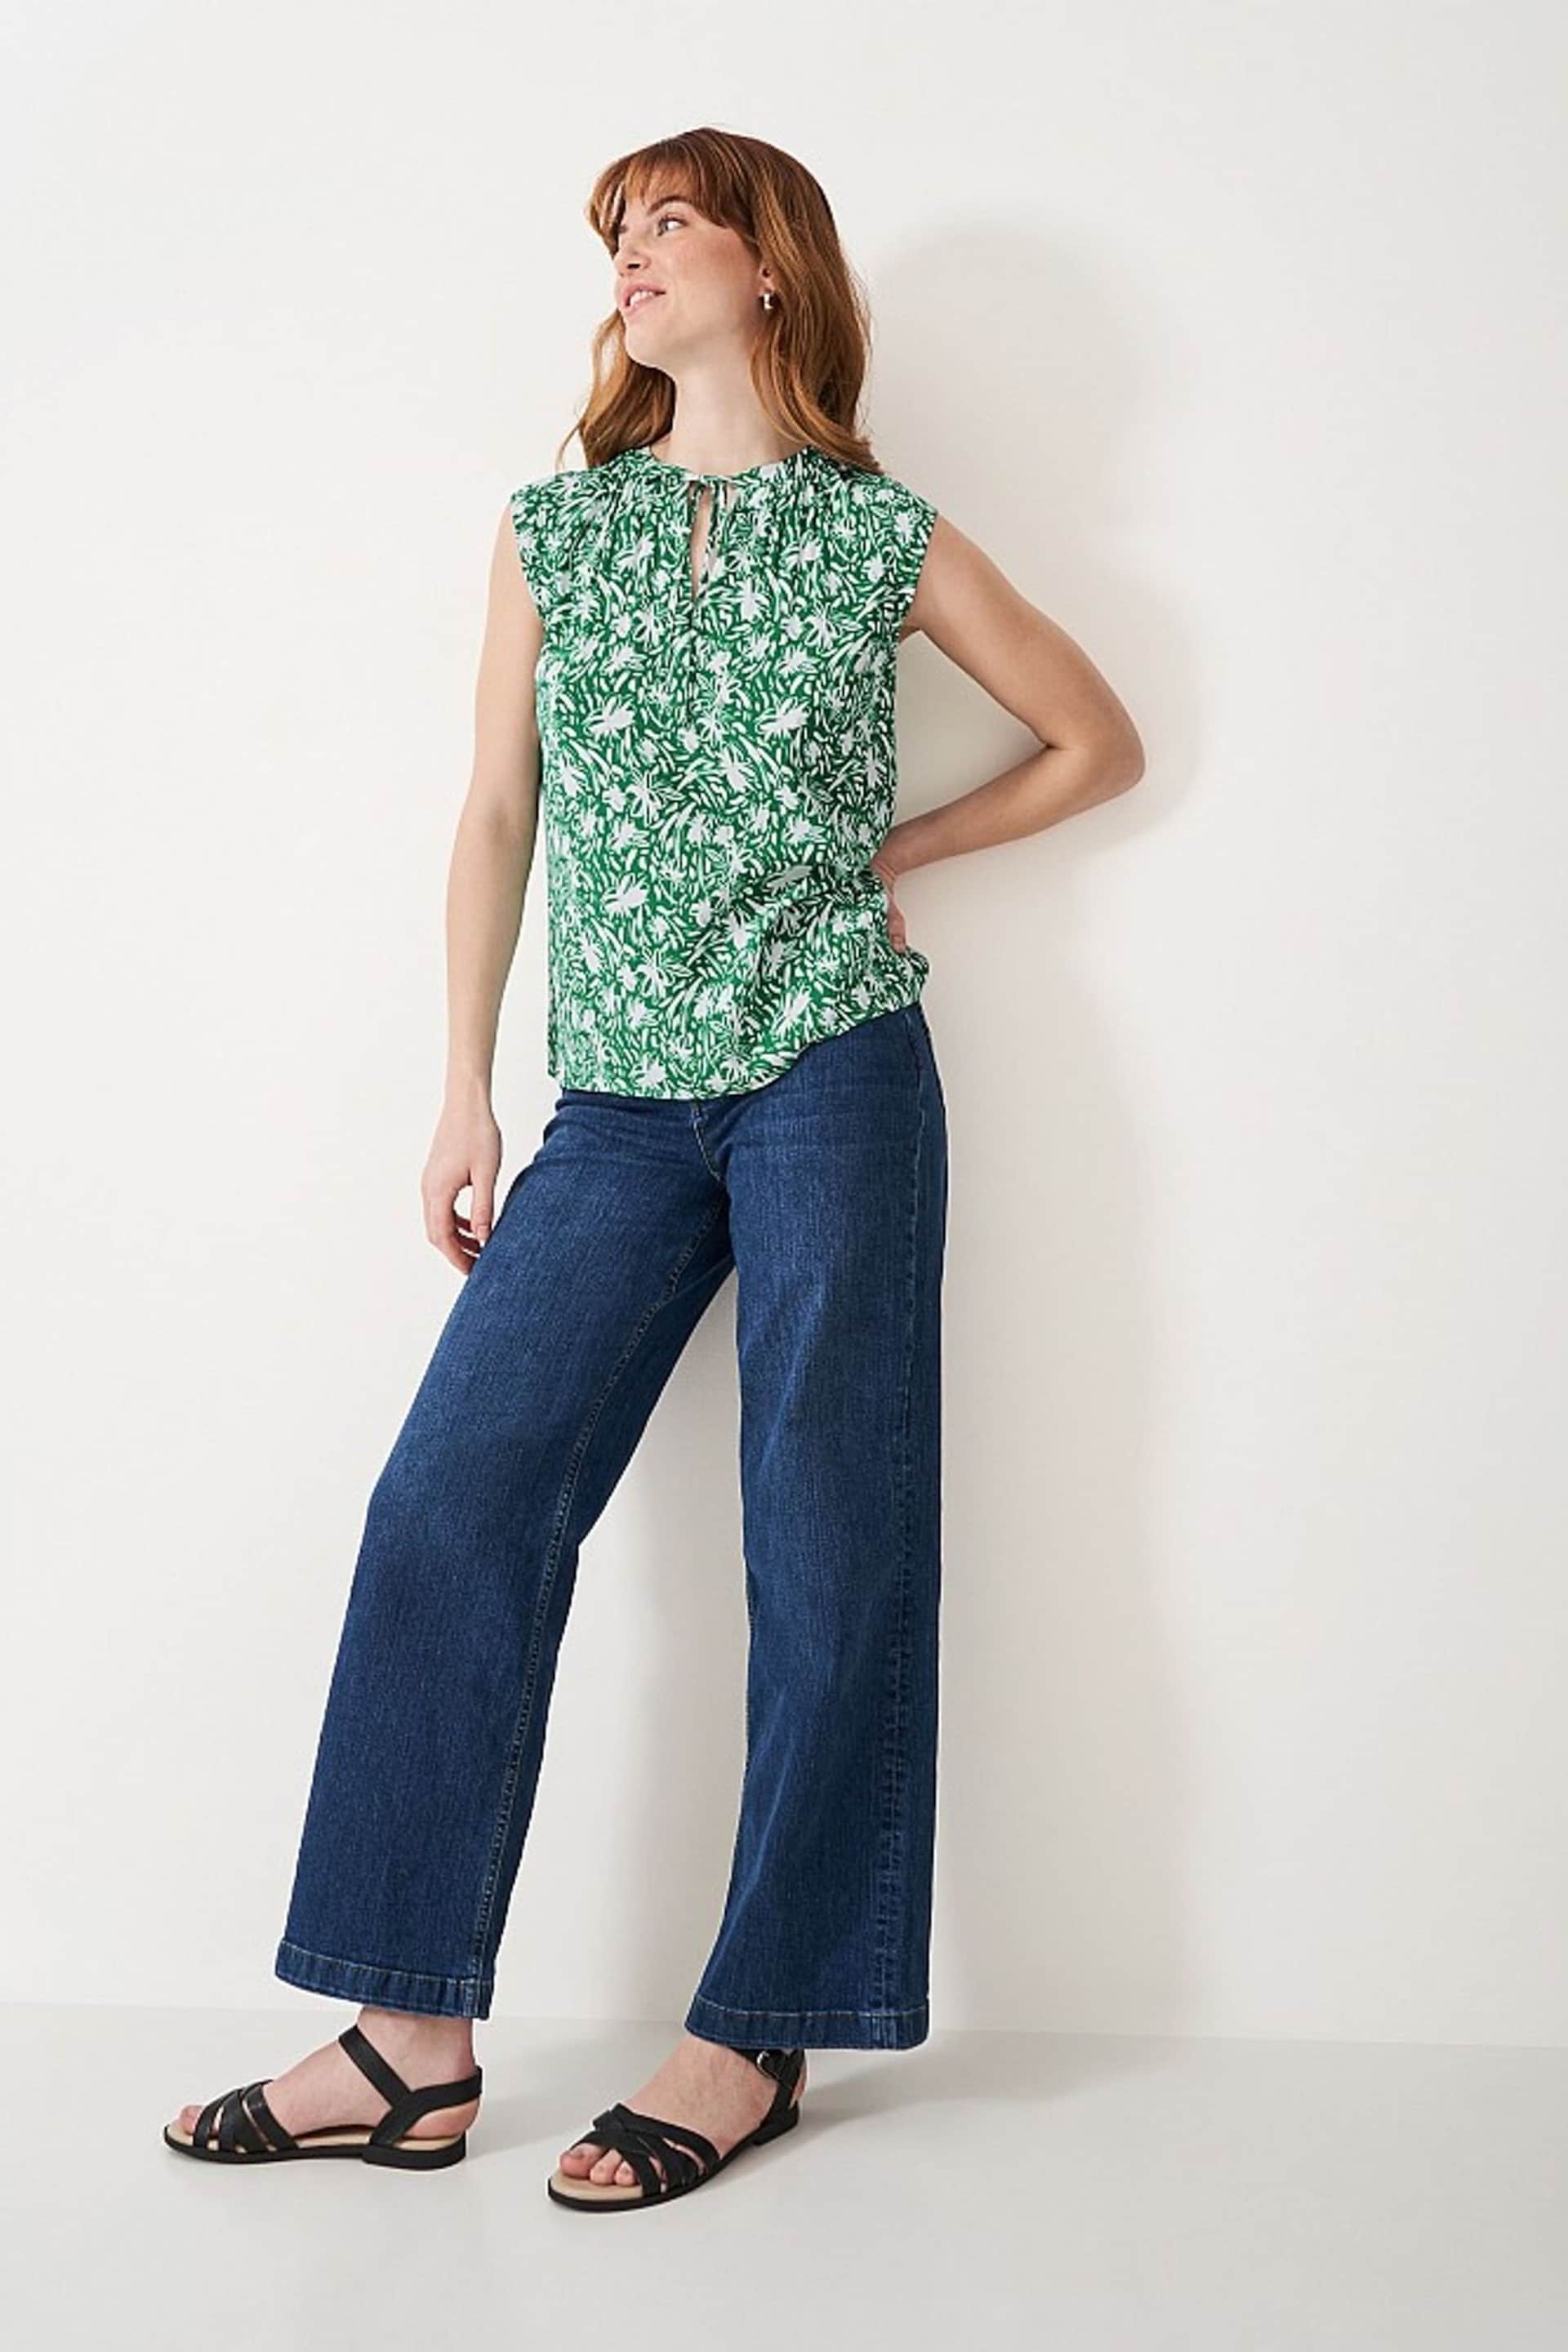 Crew Clothing Company Green Floral Viscose Relaxed Blouse - Image 1 of 4